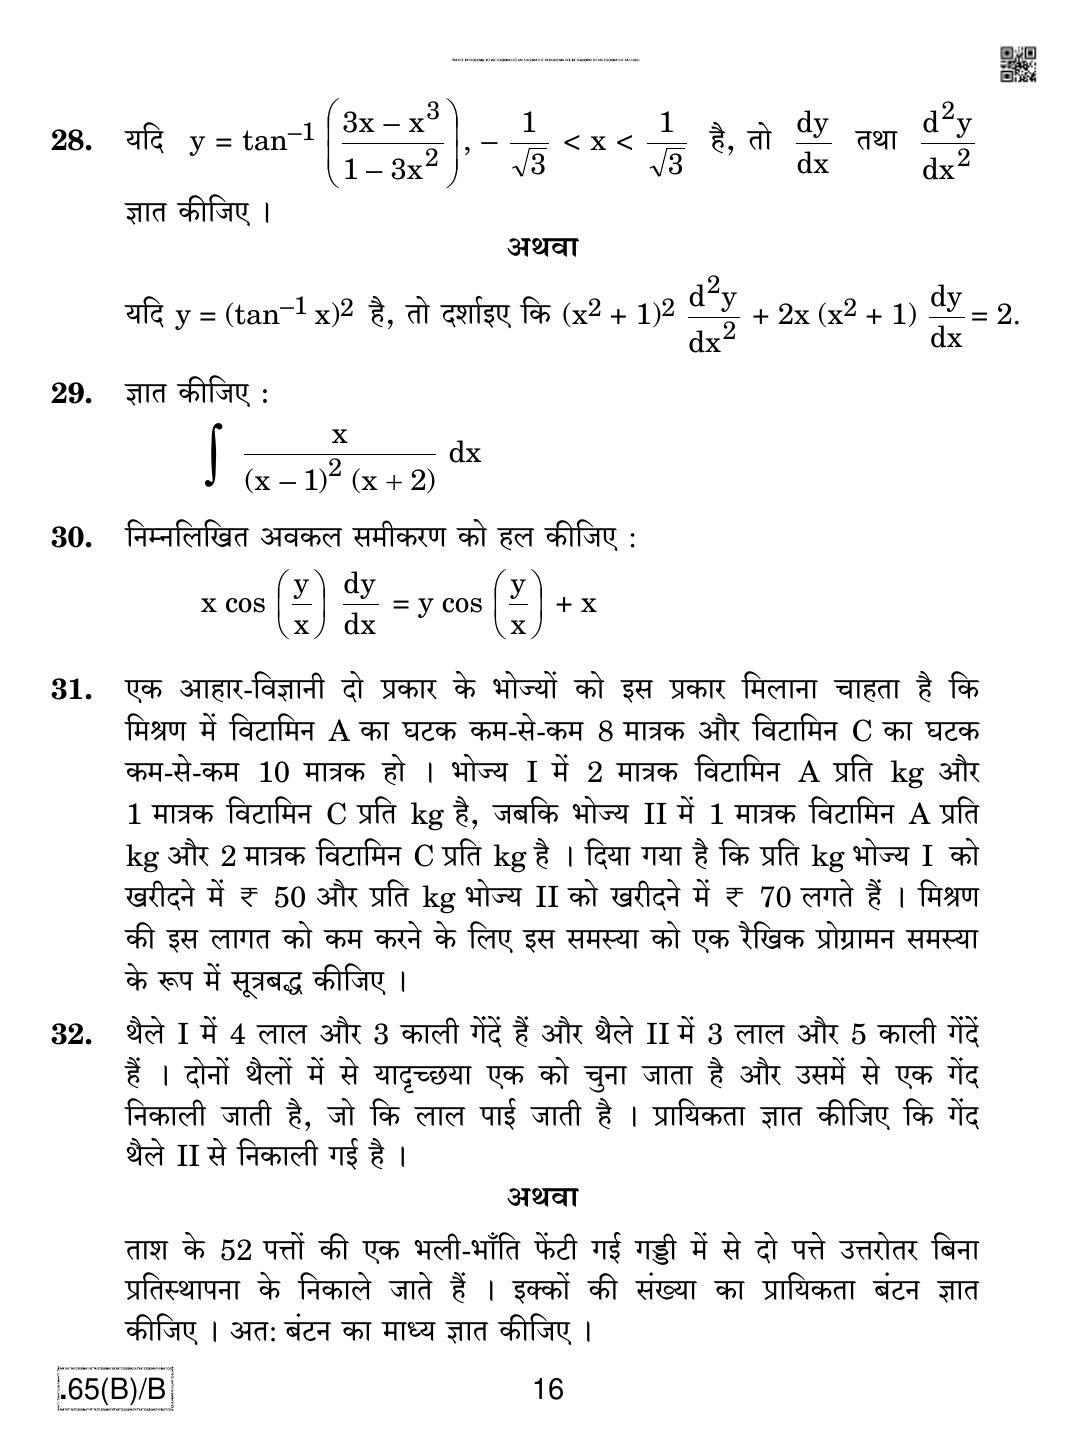 CBSE Class 12 65(B)-C - Maths For Blind Candidates 2020 Compartment Question Paper - Page 16